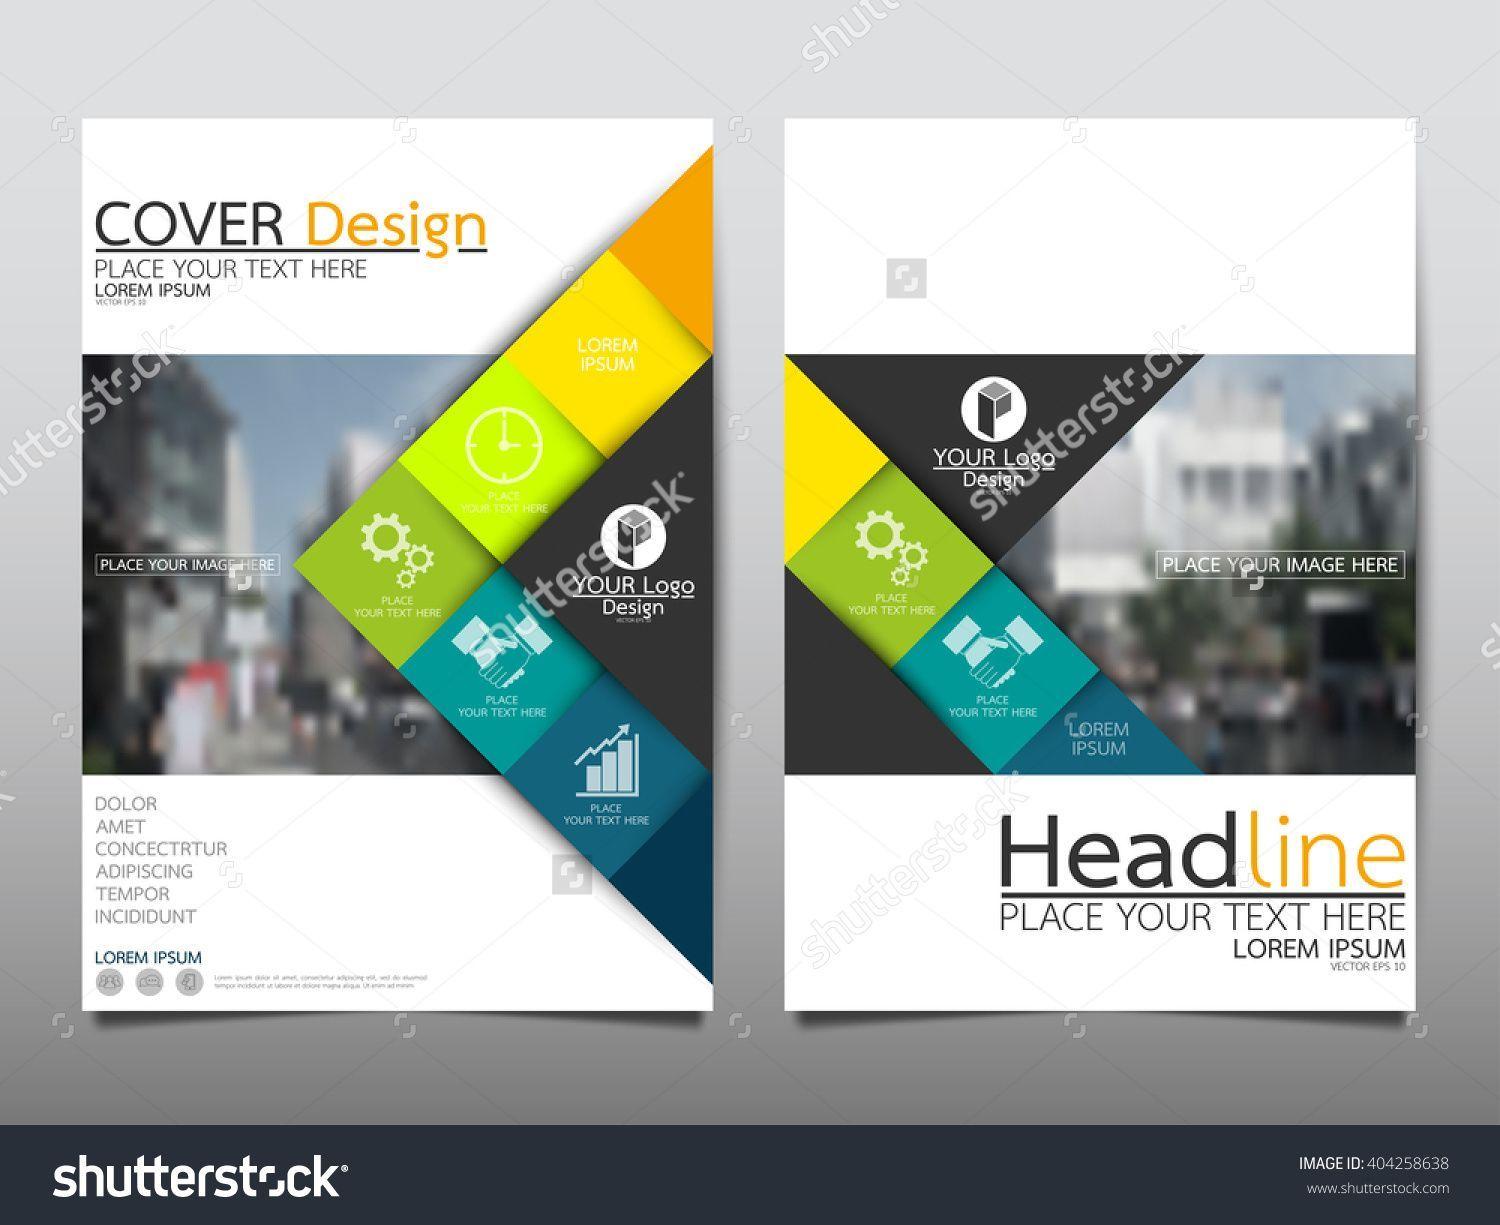 Yellow Background Blue Square Logo - Yellow And Blue Square Annual Report Brochure Flyer Design Template